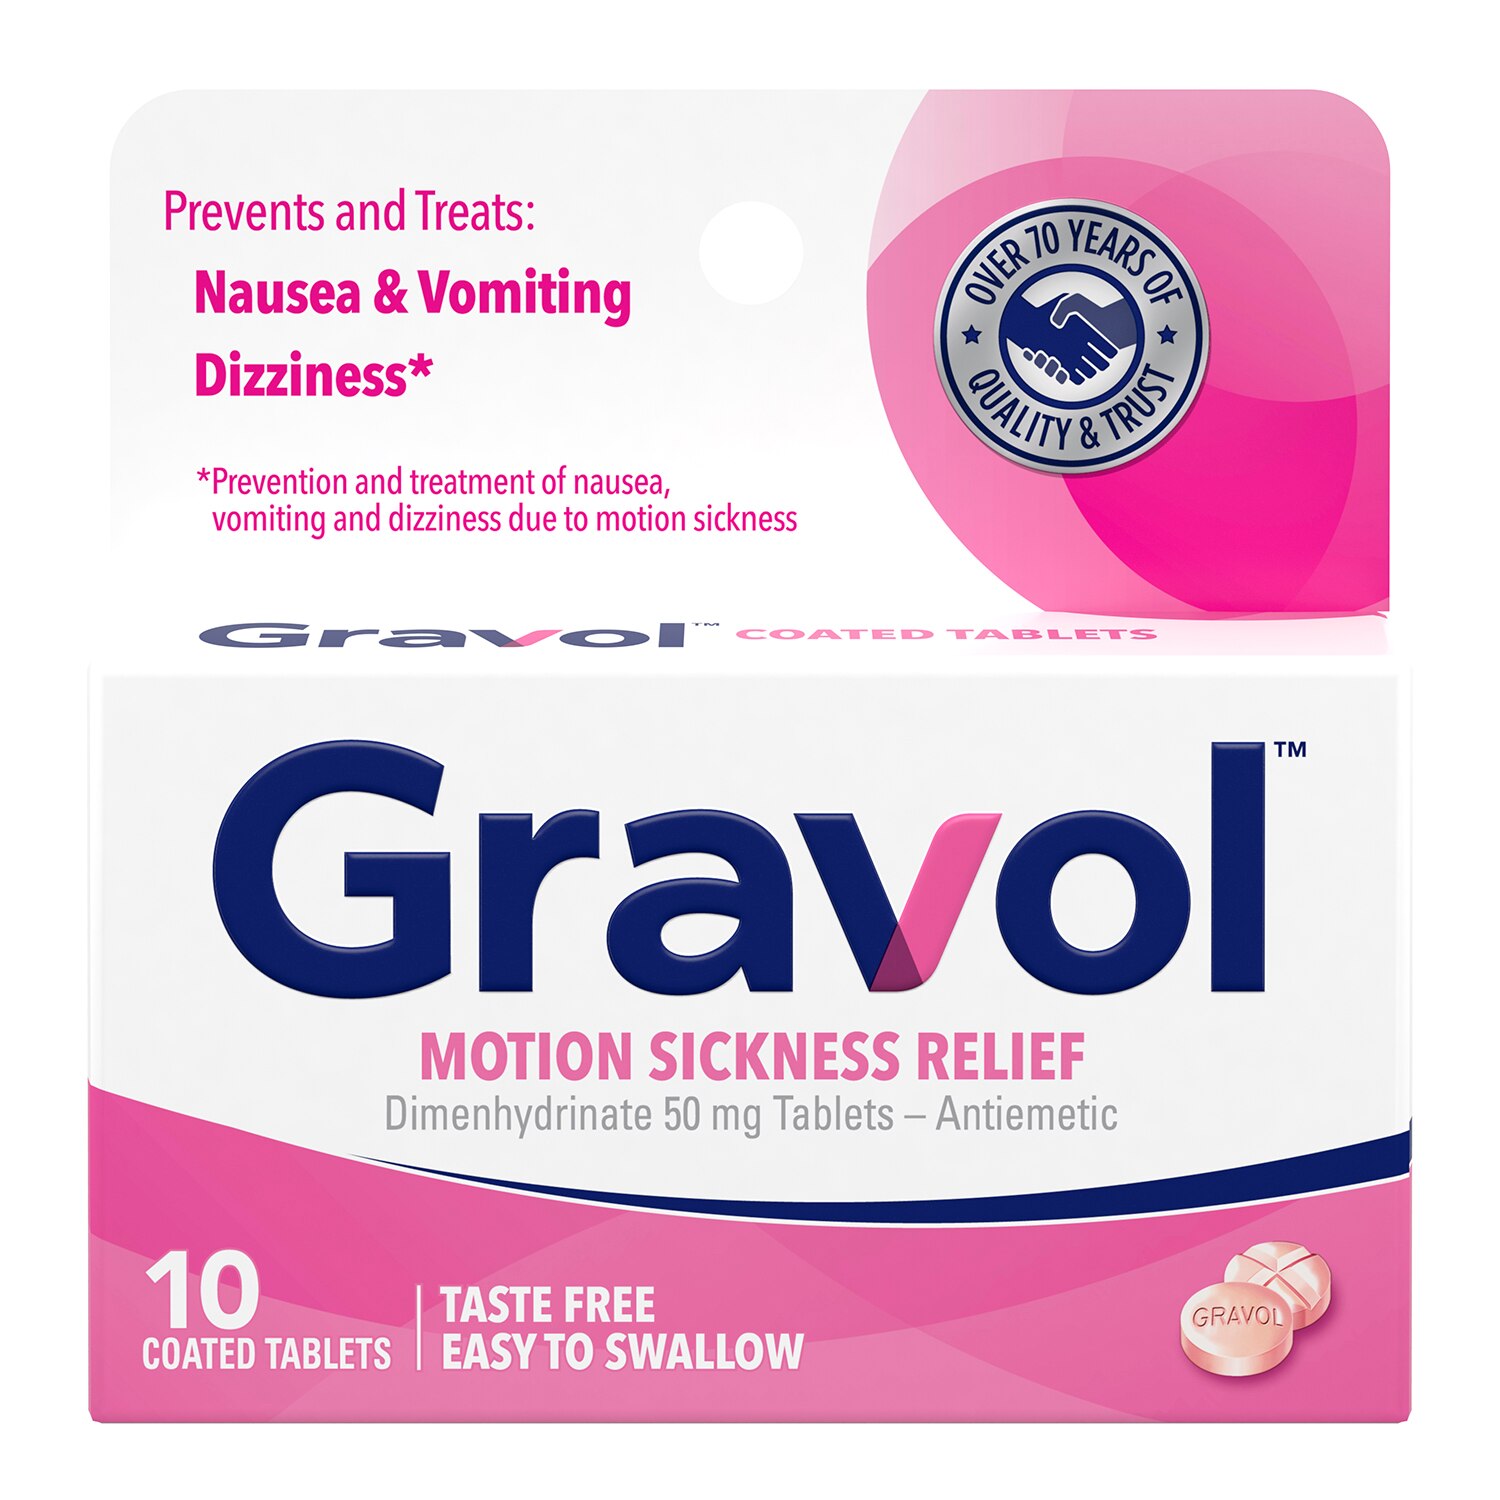 Gravol Motion Sickness Relief Tablets - Dimenhydrinate 50 mg, 10 CT